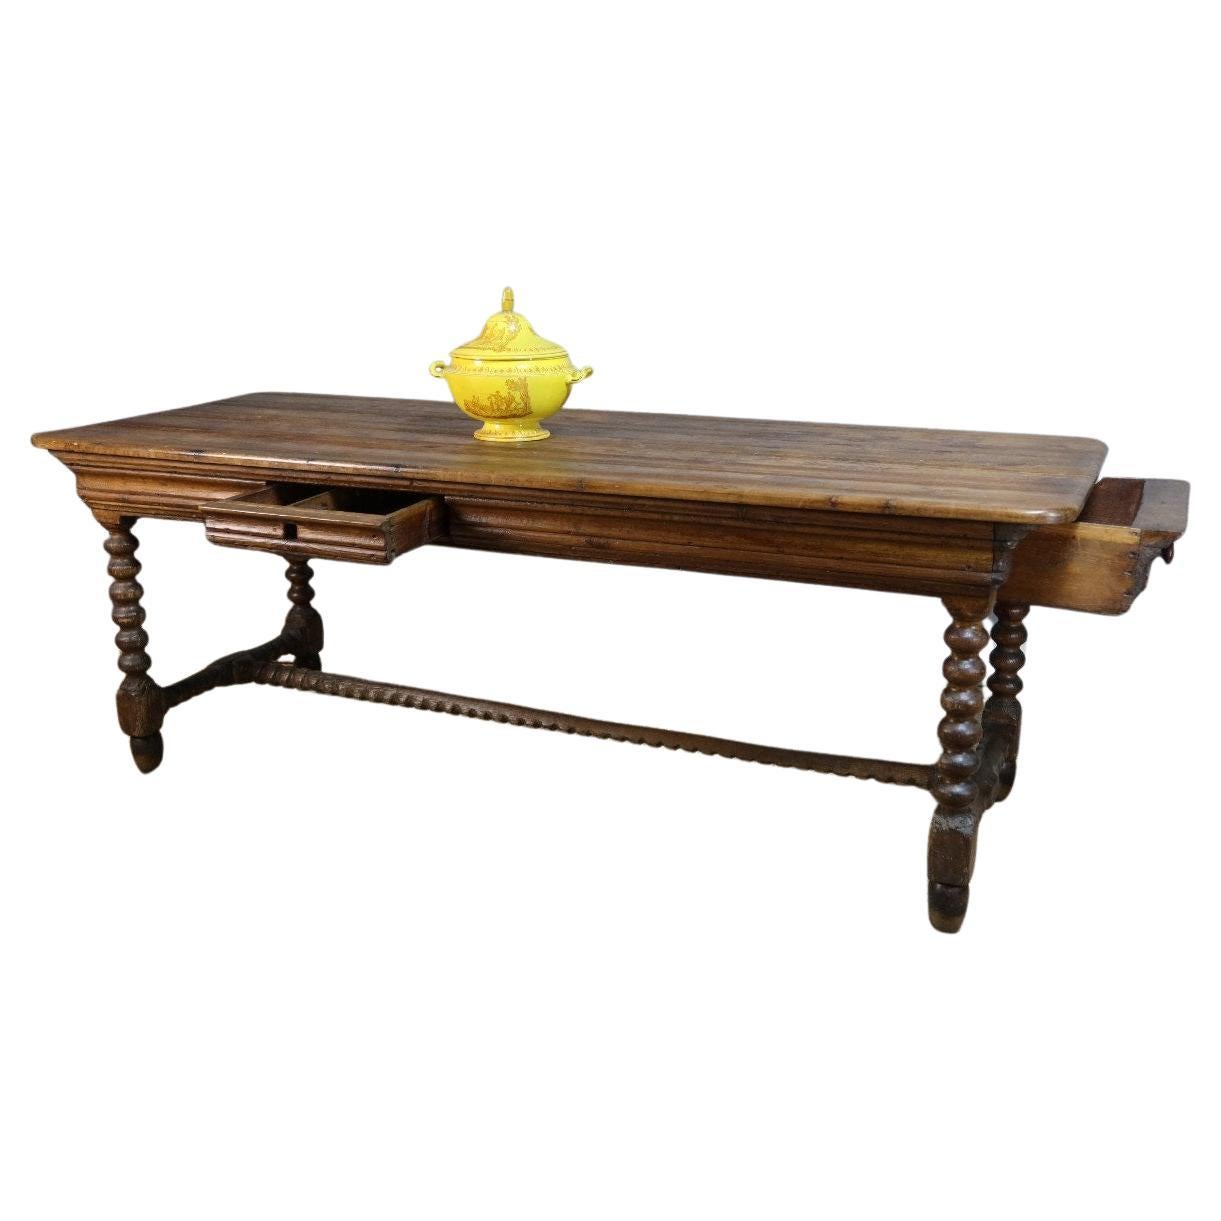 Natural wood ogee sash table with two drawers. 
This table rests on four twisted legs joined by a 